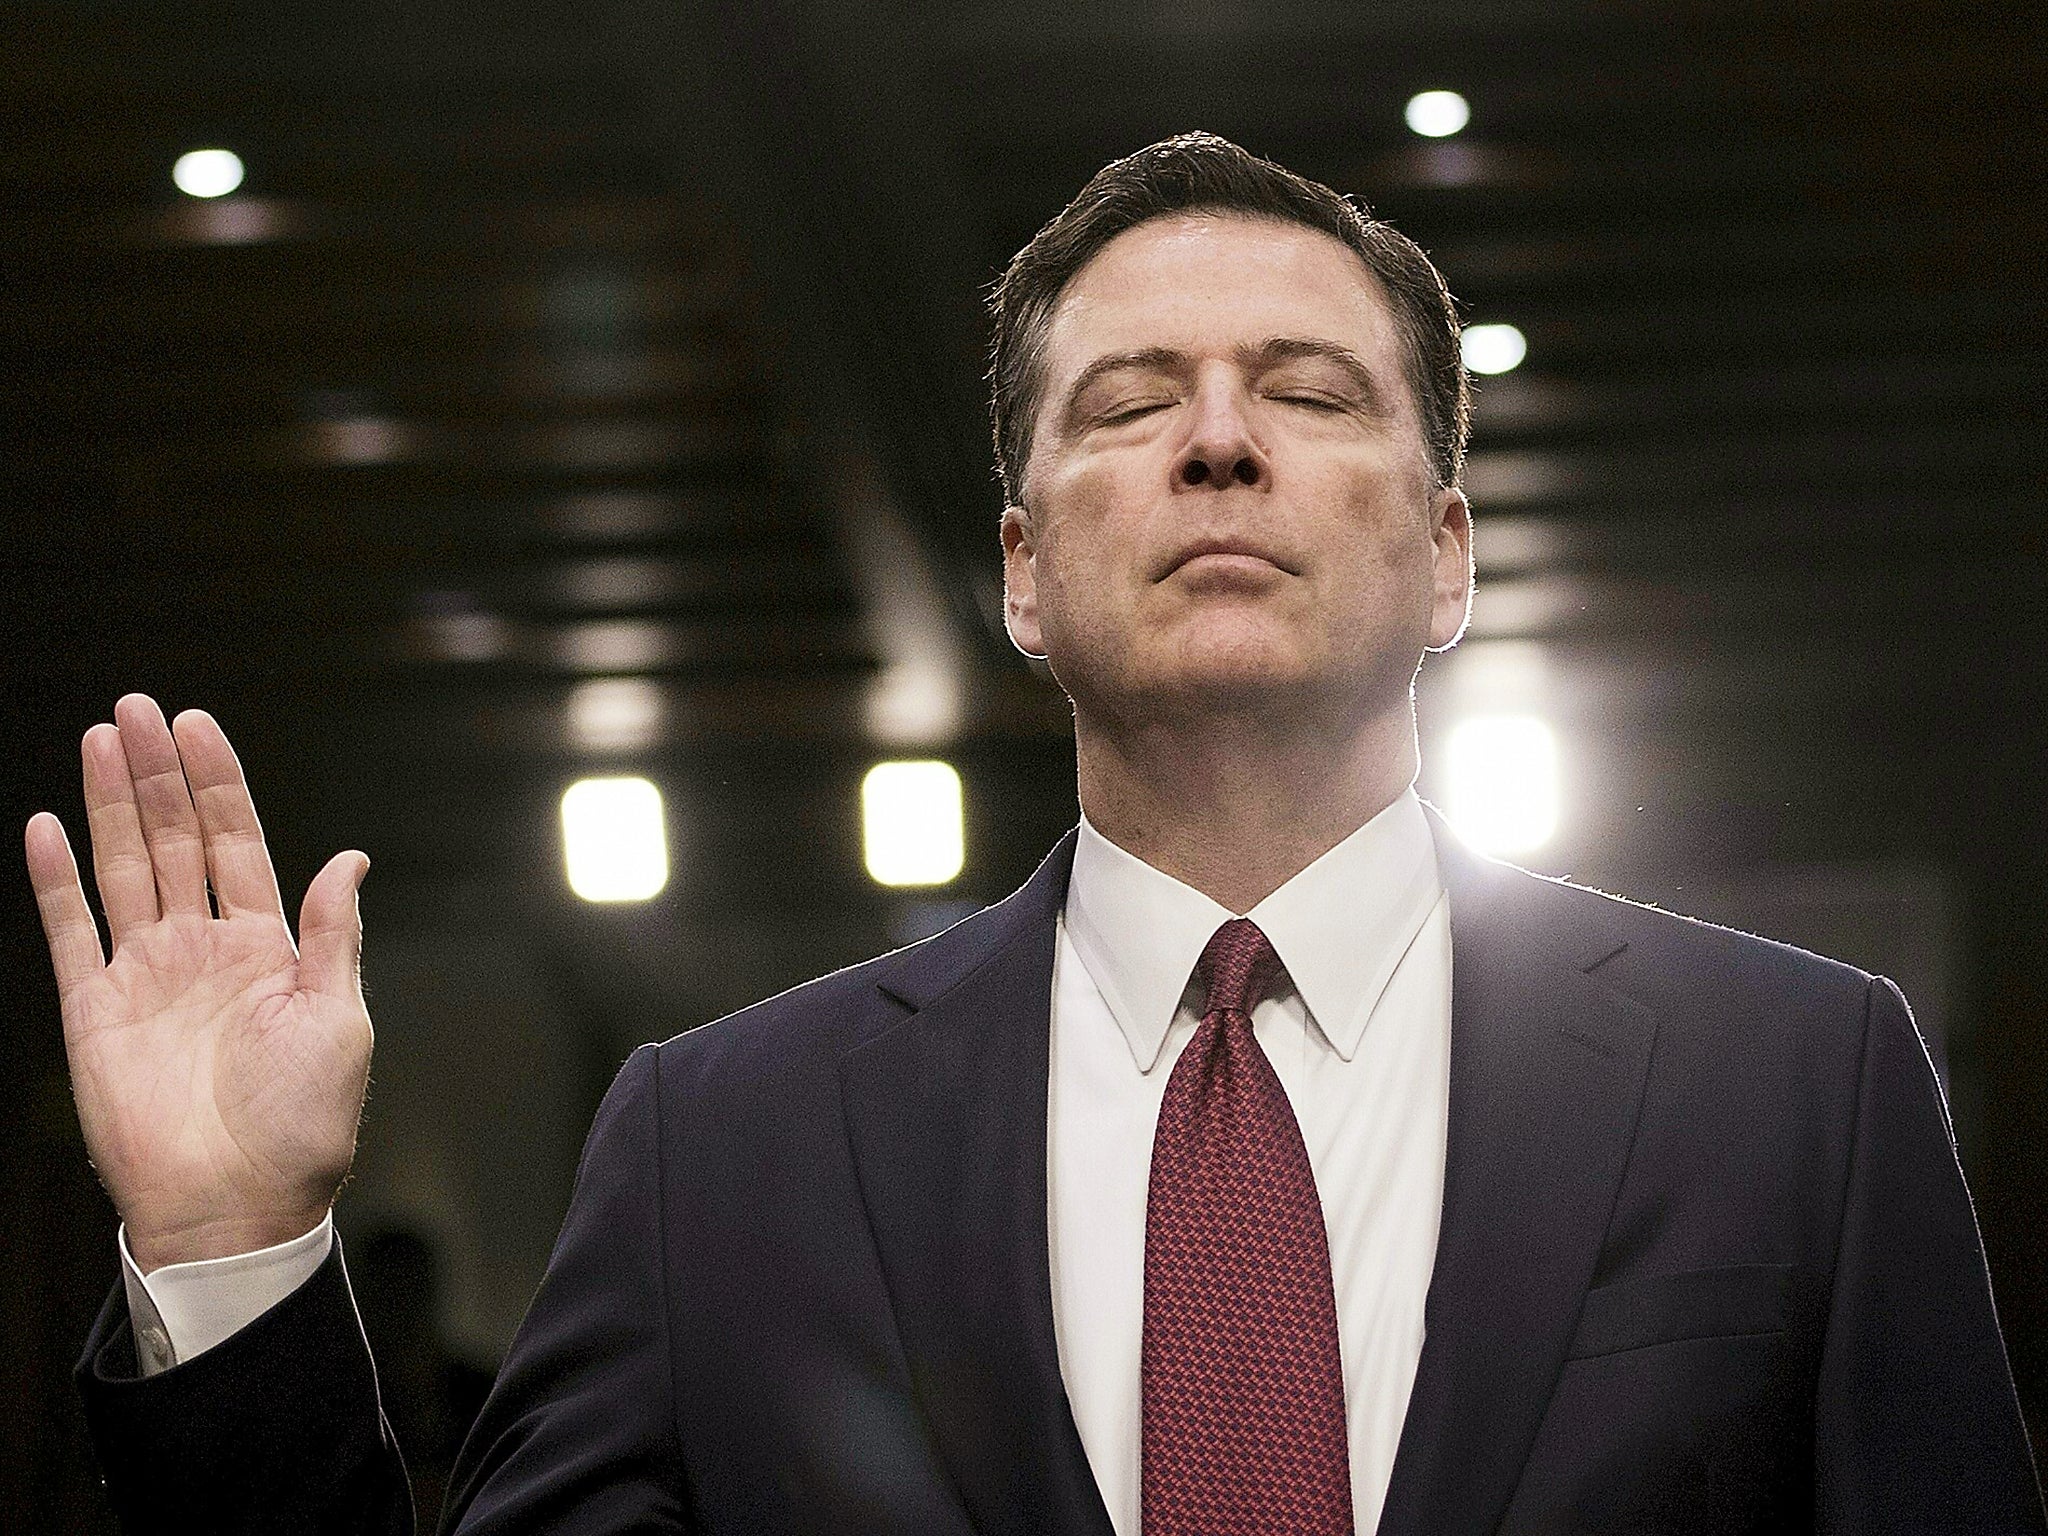 Former FBI director James Comey is sworn in during a hearing before the Senate Select Committee on Intelligence on Capitol Hill in Washington, DC